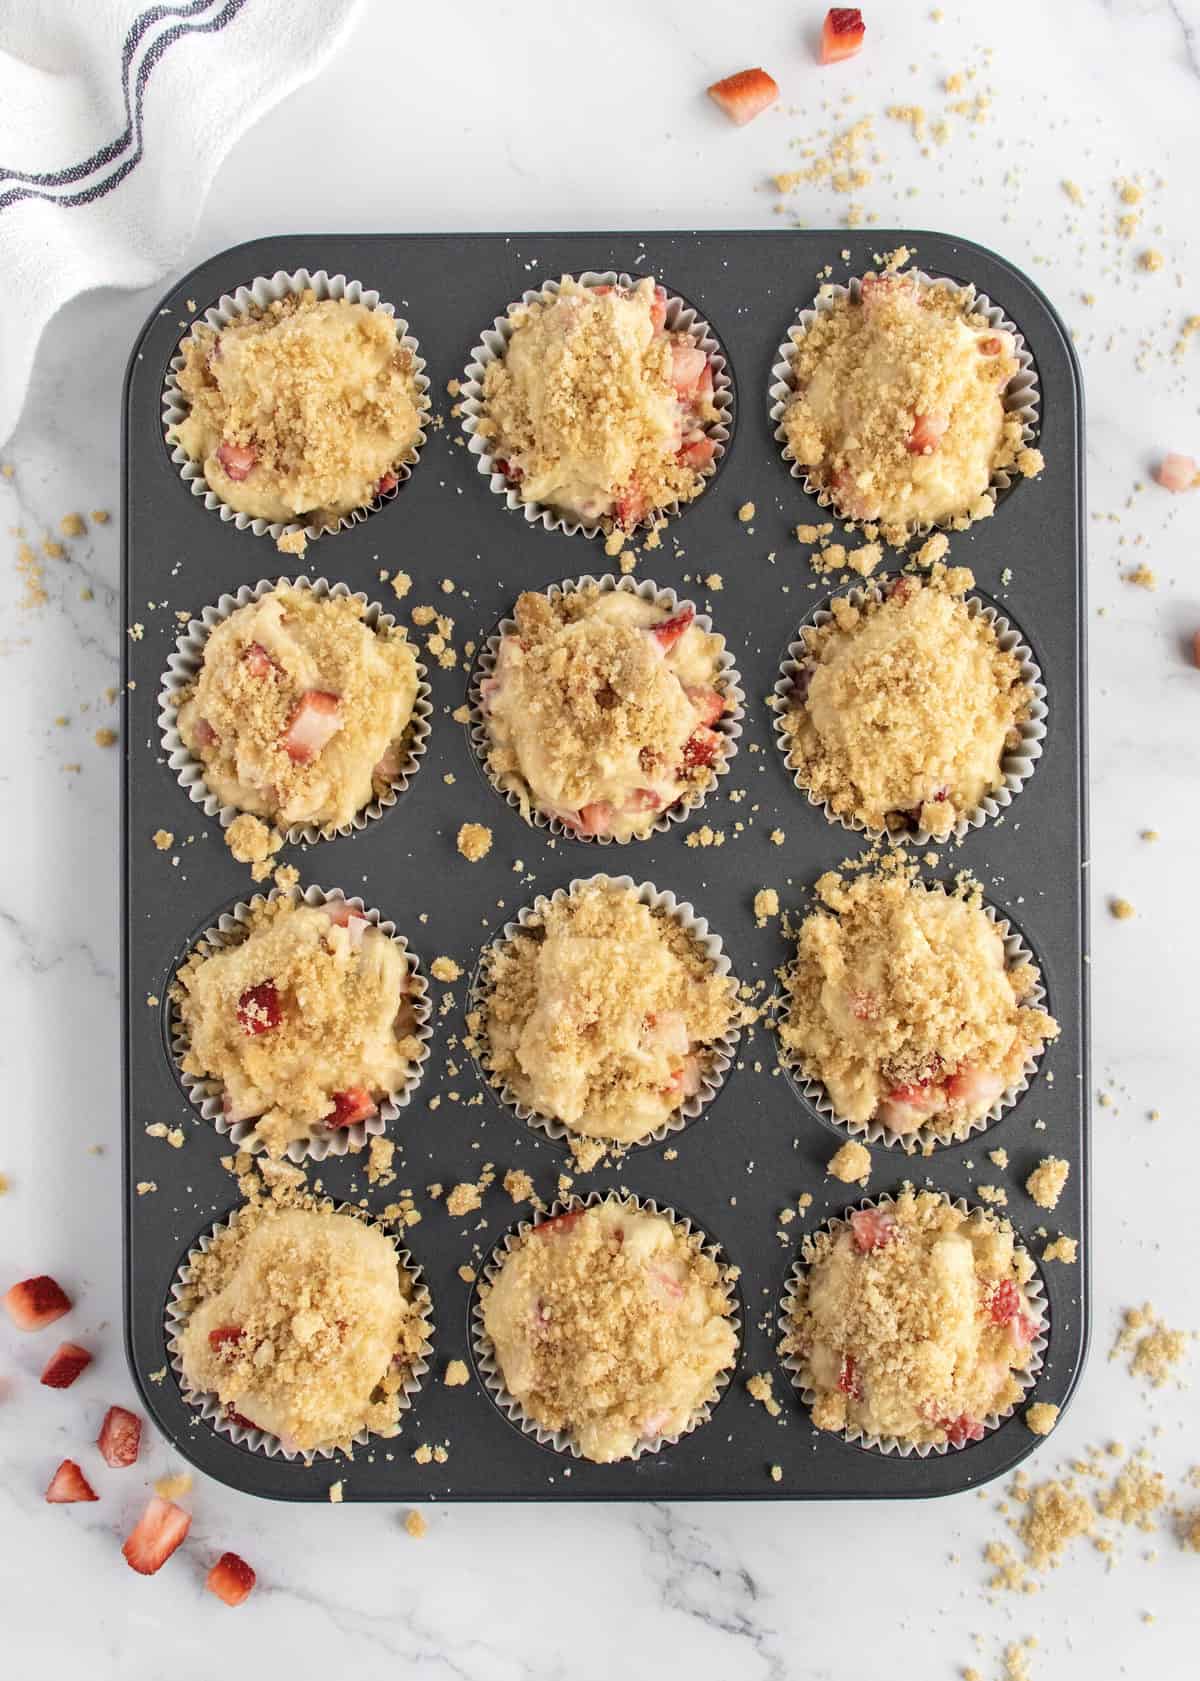 Strawberry Streusel Muffins by The BakerMama